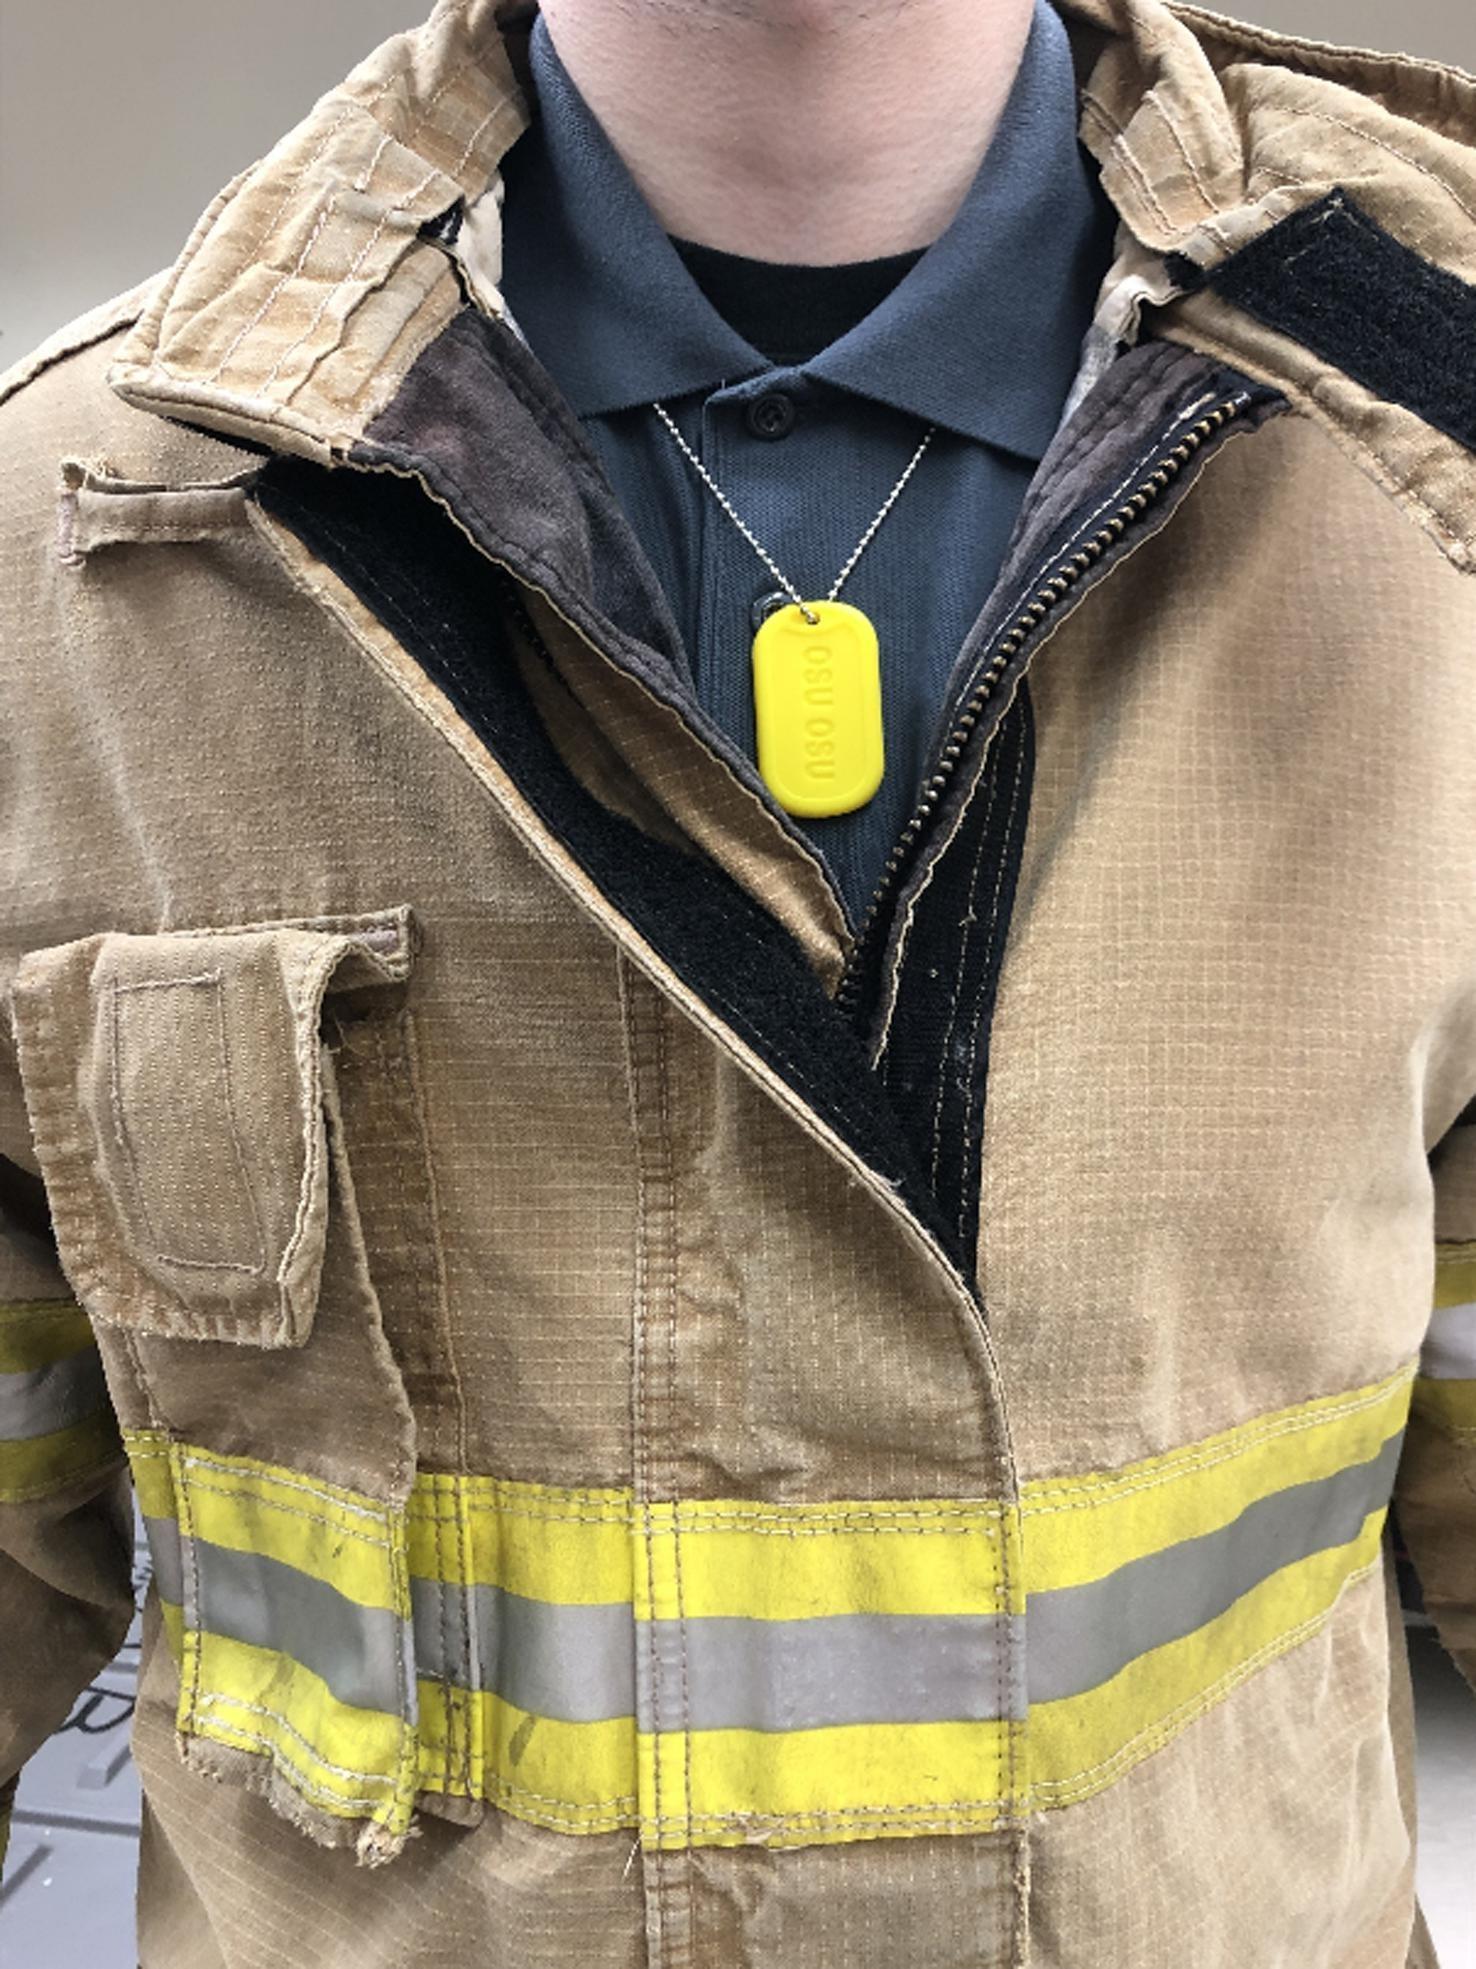 Firefighters in the Kansas City, Missouri, area, wore personal passive samplers in the shape of a military-style dog tag made of silicone on an elastic necklace.